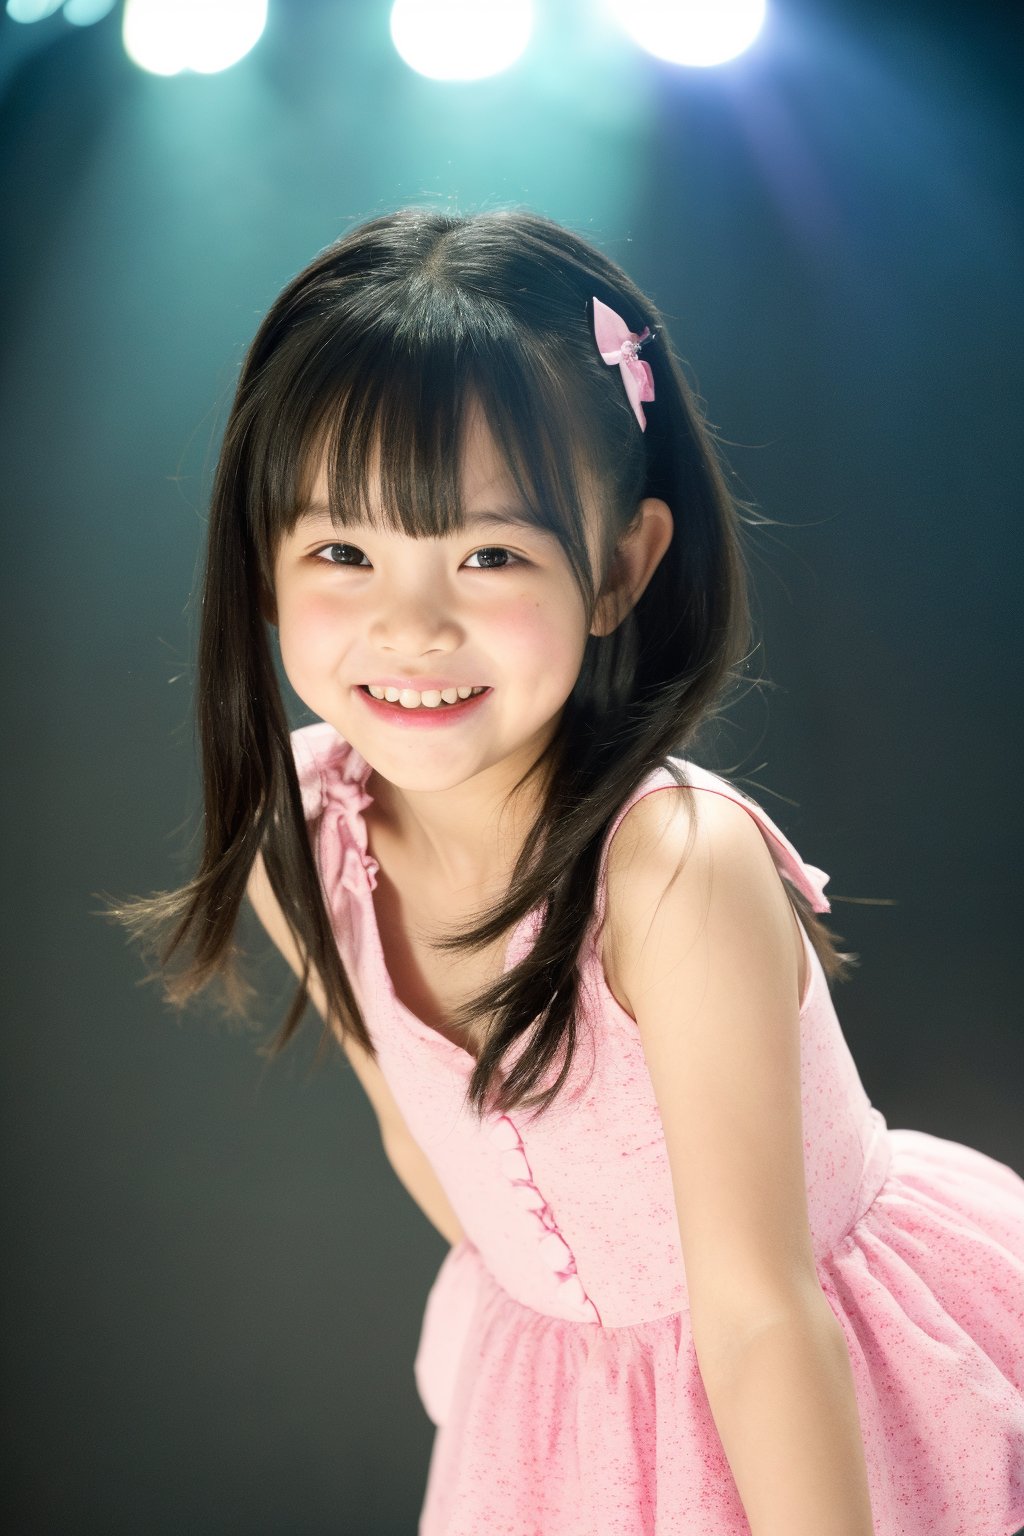  (((loli 6yo 2girls, child, Children, flat chest, Petite,
Skinny Child Body Type))), (ultra-high resolution, super detailed skin, photorealistic Realistic textured skin), (Baby Face, Full Body, Blurred background), blunt bangs, happy, Silly Laugh, Playing around, realistic, soft Contrast, indirect lighting, Dancing, live Stage background, idol lolipop dress